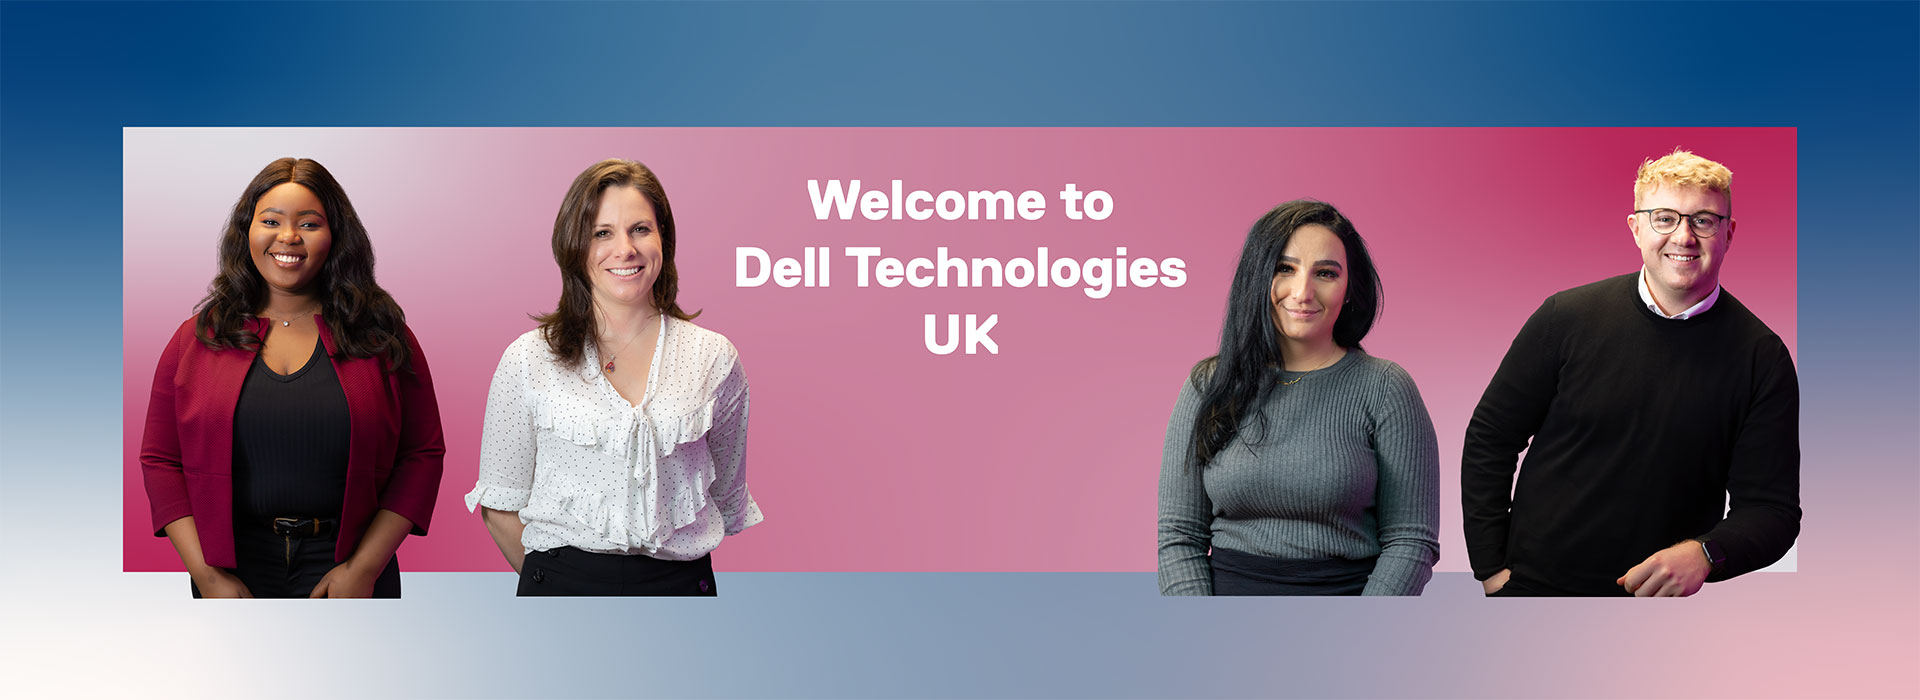 Careers at Dell UK